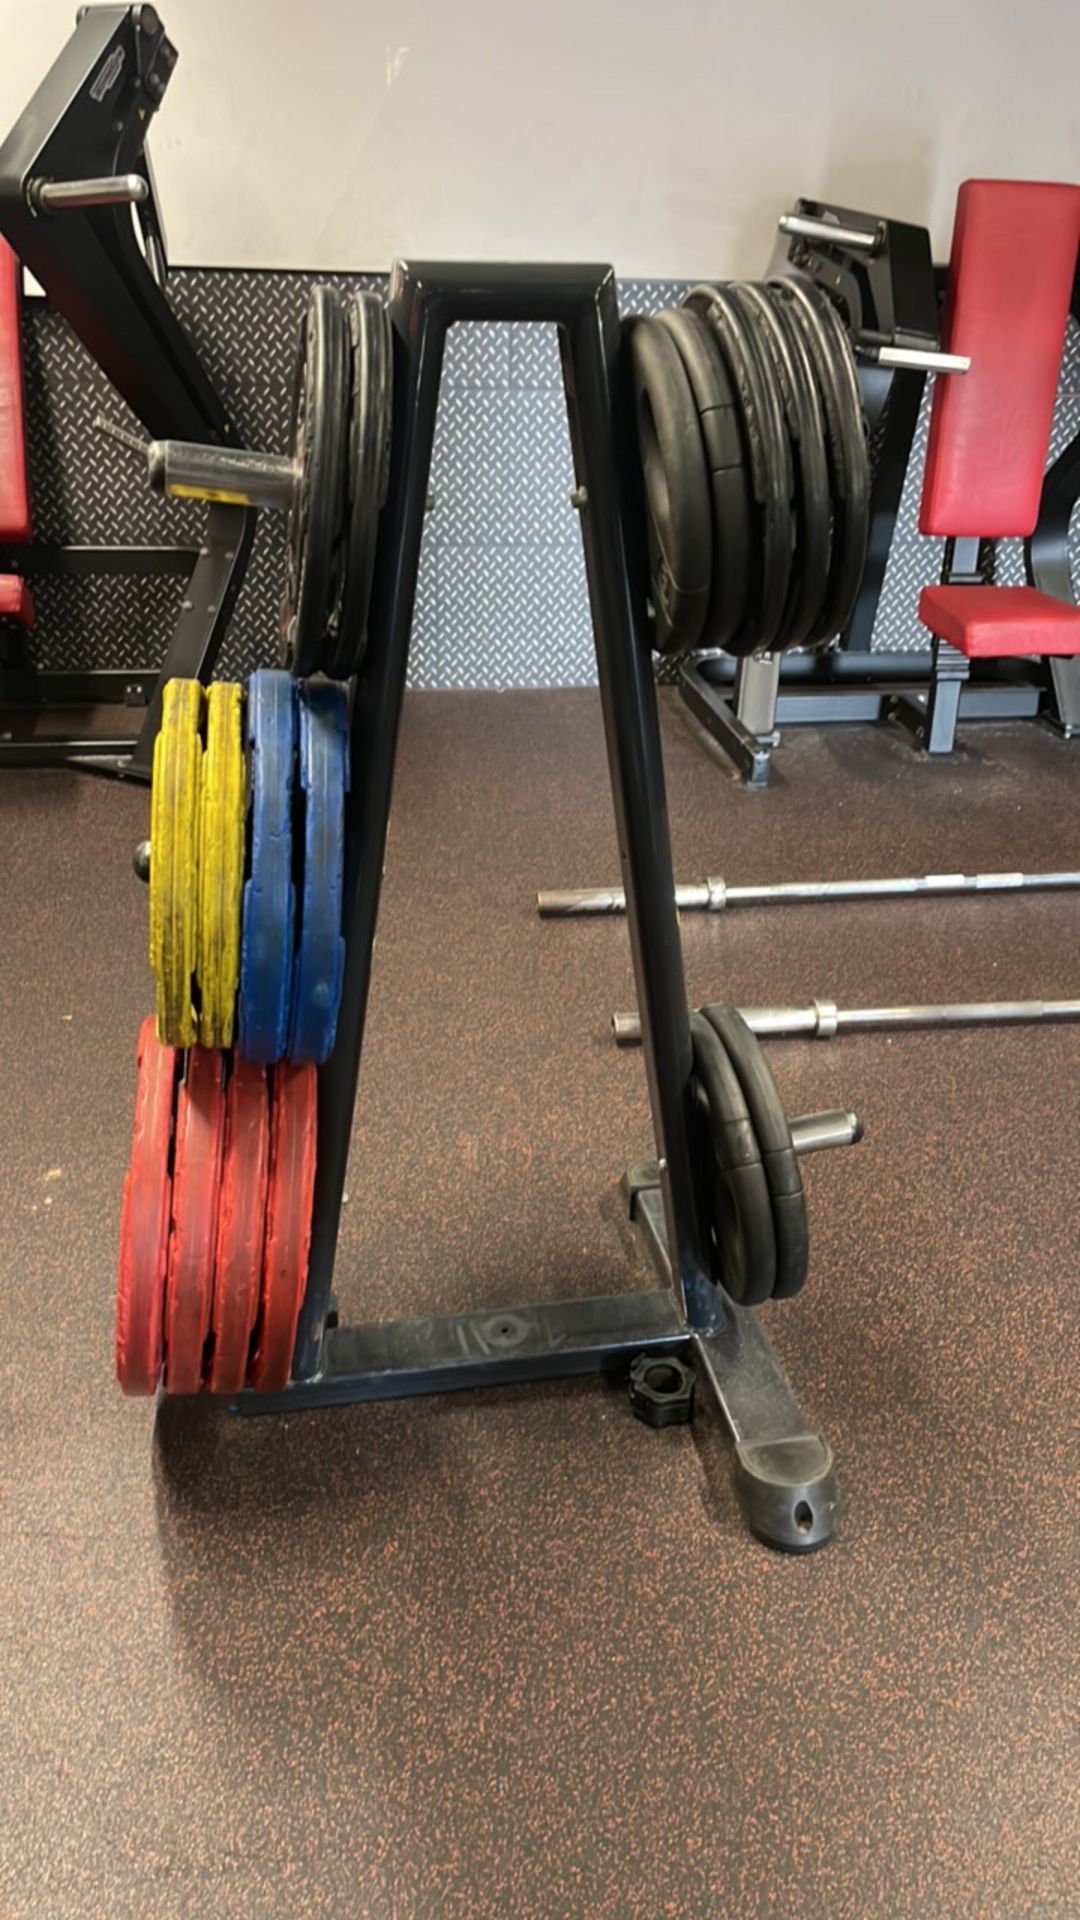 Plate Tree including Weight Plates: